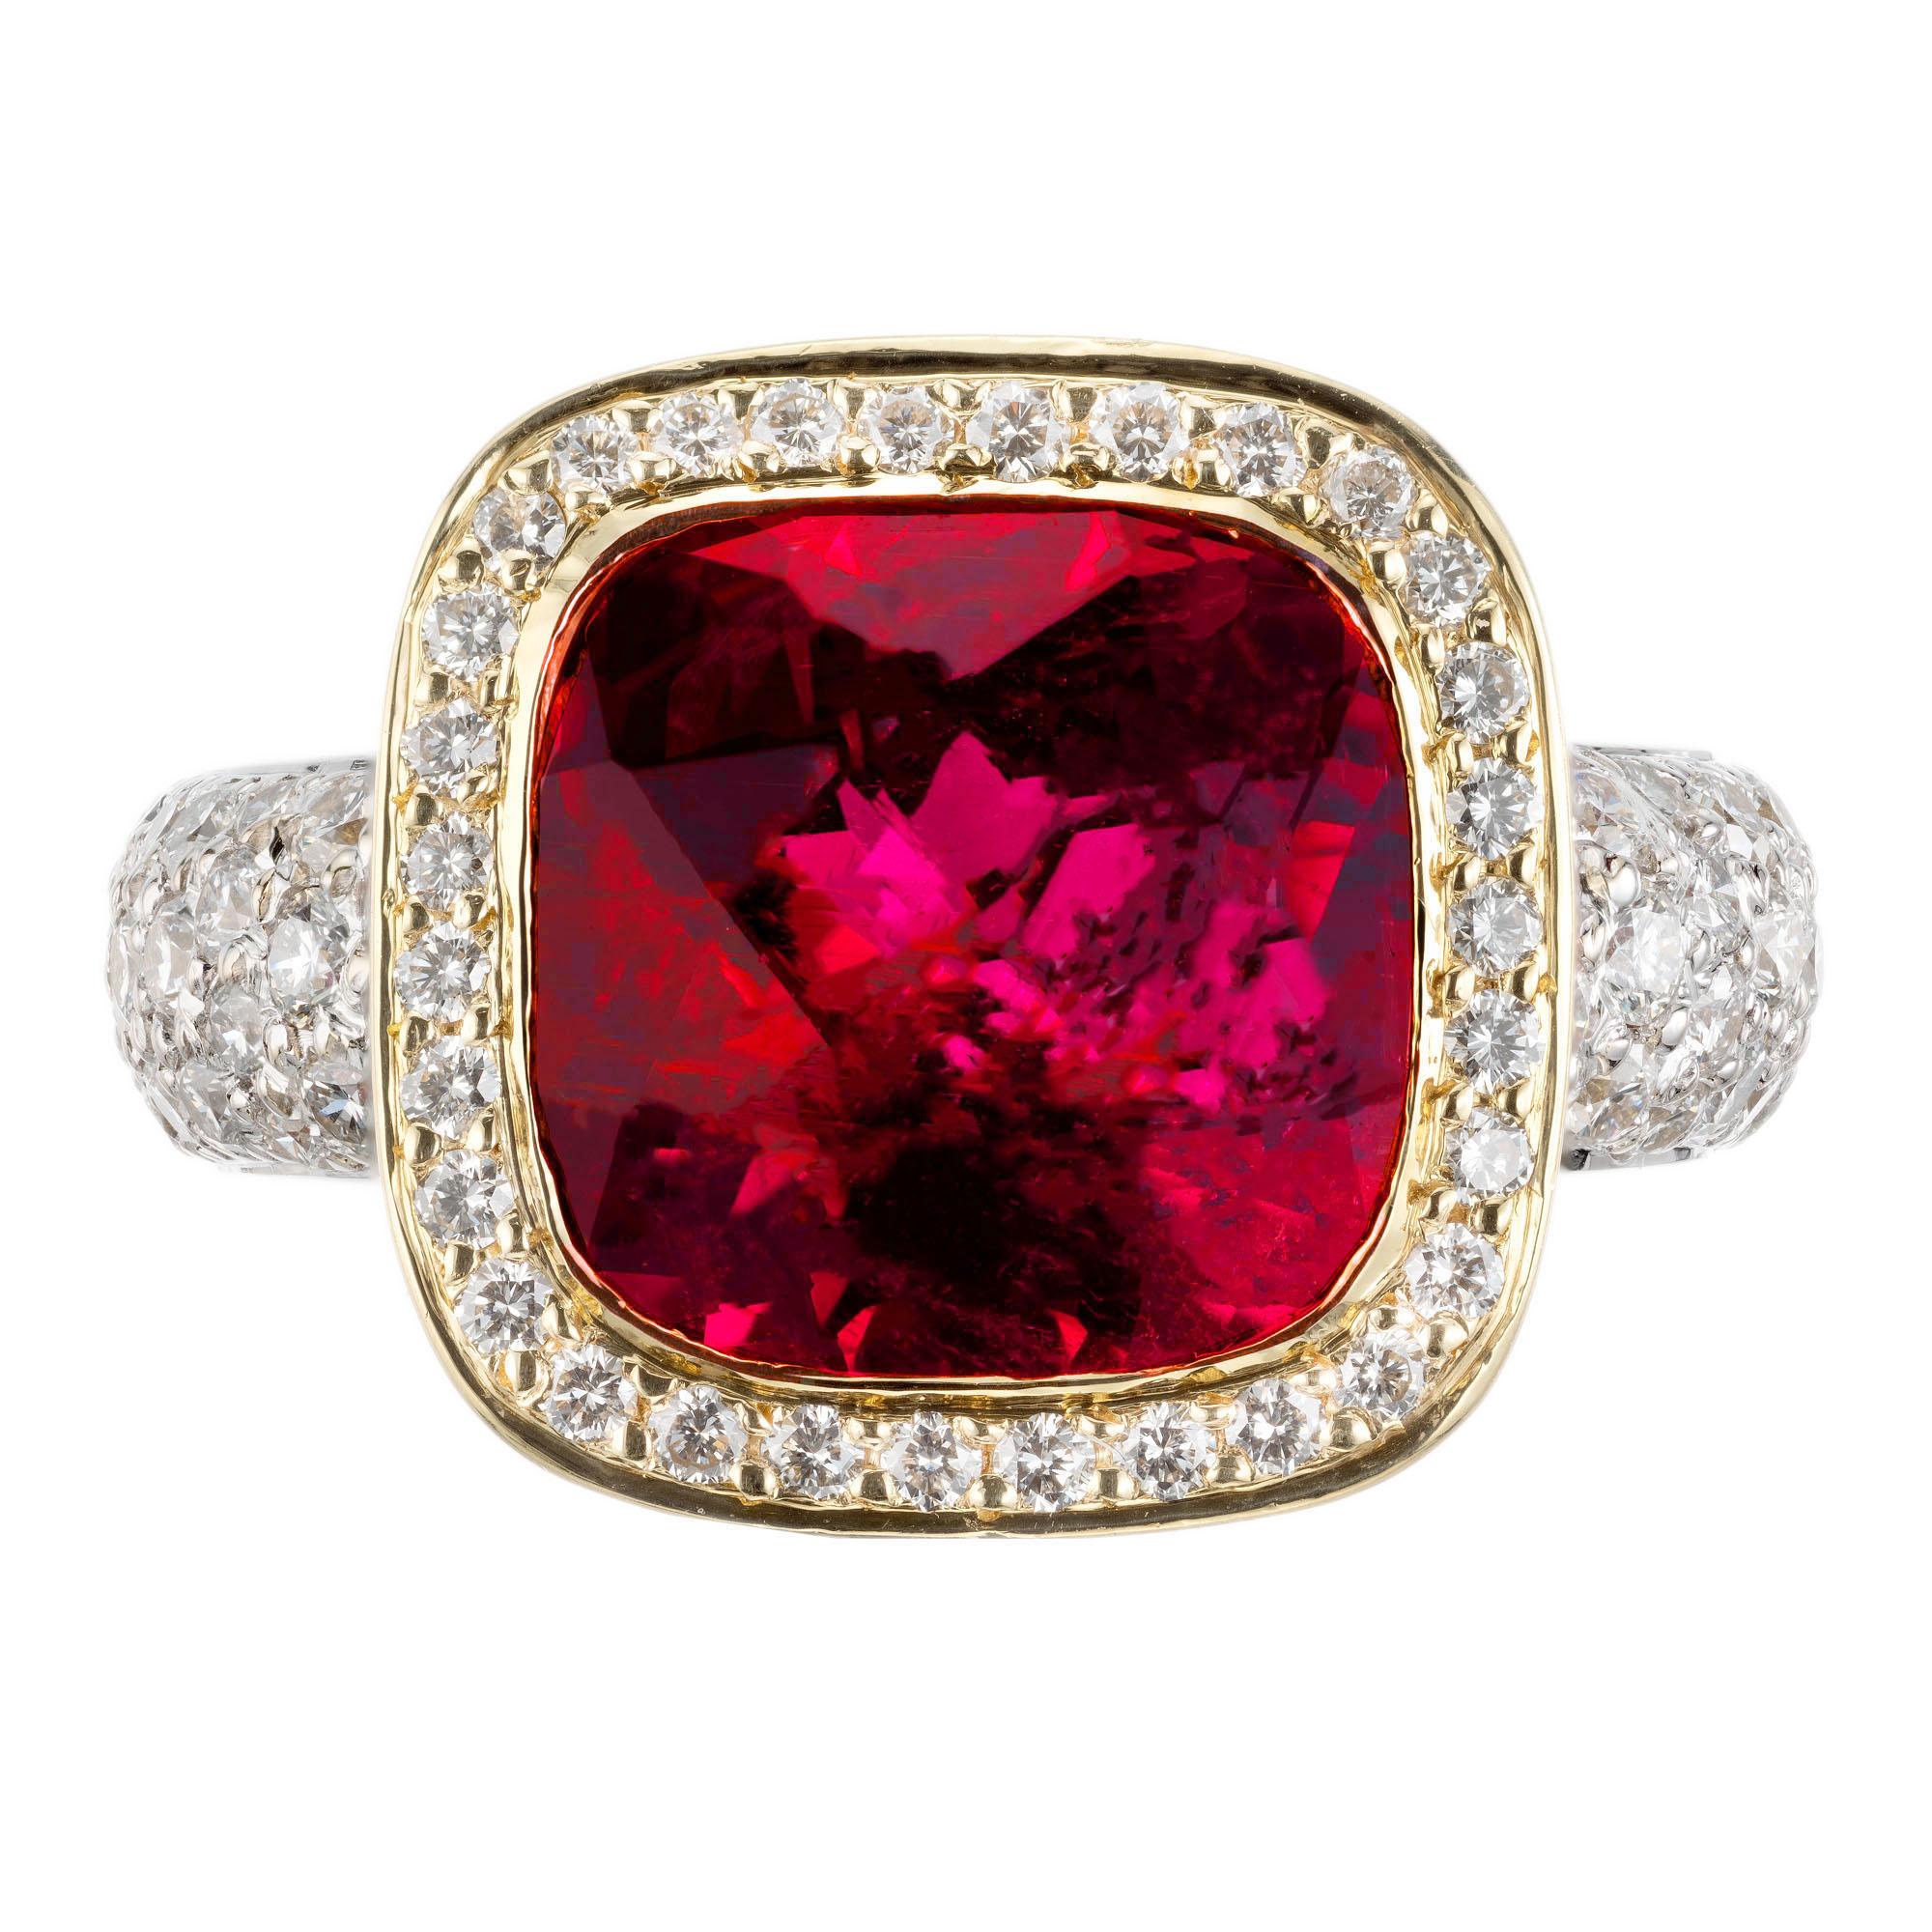 Bright red, pink tourmaline and diamond cocktail ring. 5.50 center cushion cut tourmaline with a halo of round diamonds in a 18k yellow and white gold setting with round diamonds along the shank. 

1 cushion cut reddish pink tourmaline SI (minor